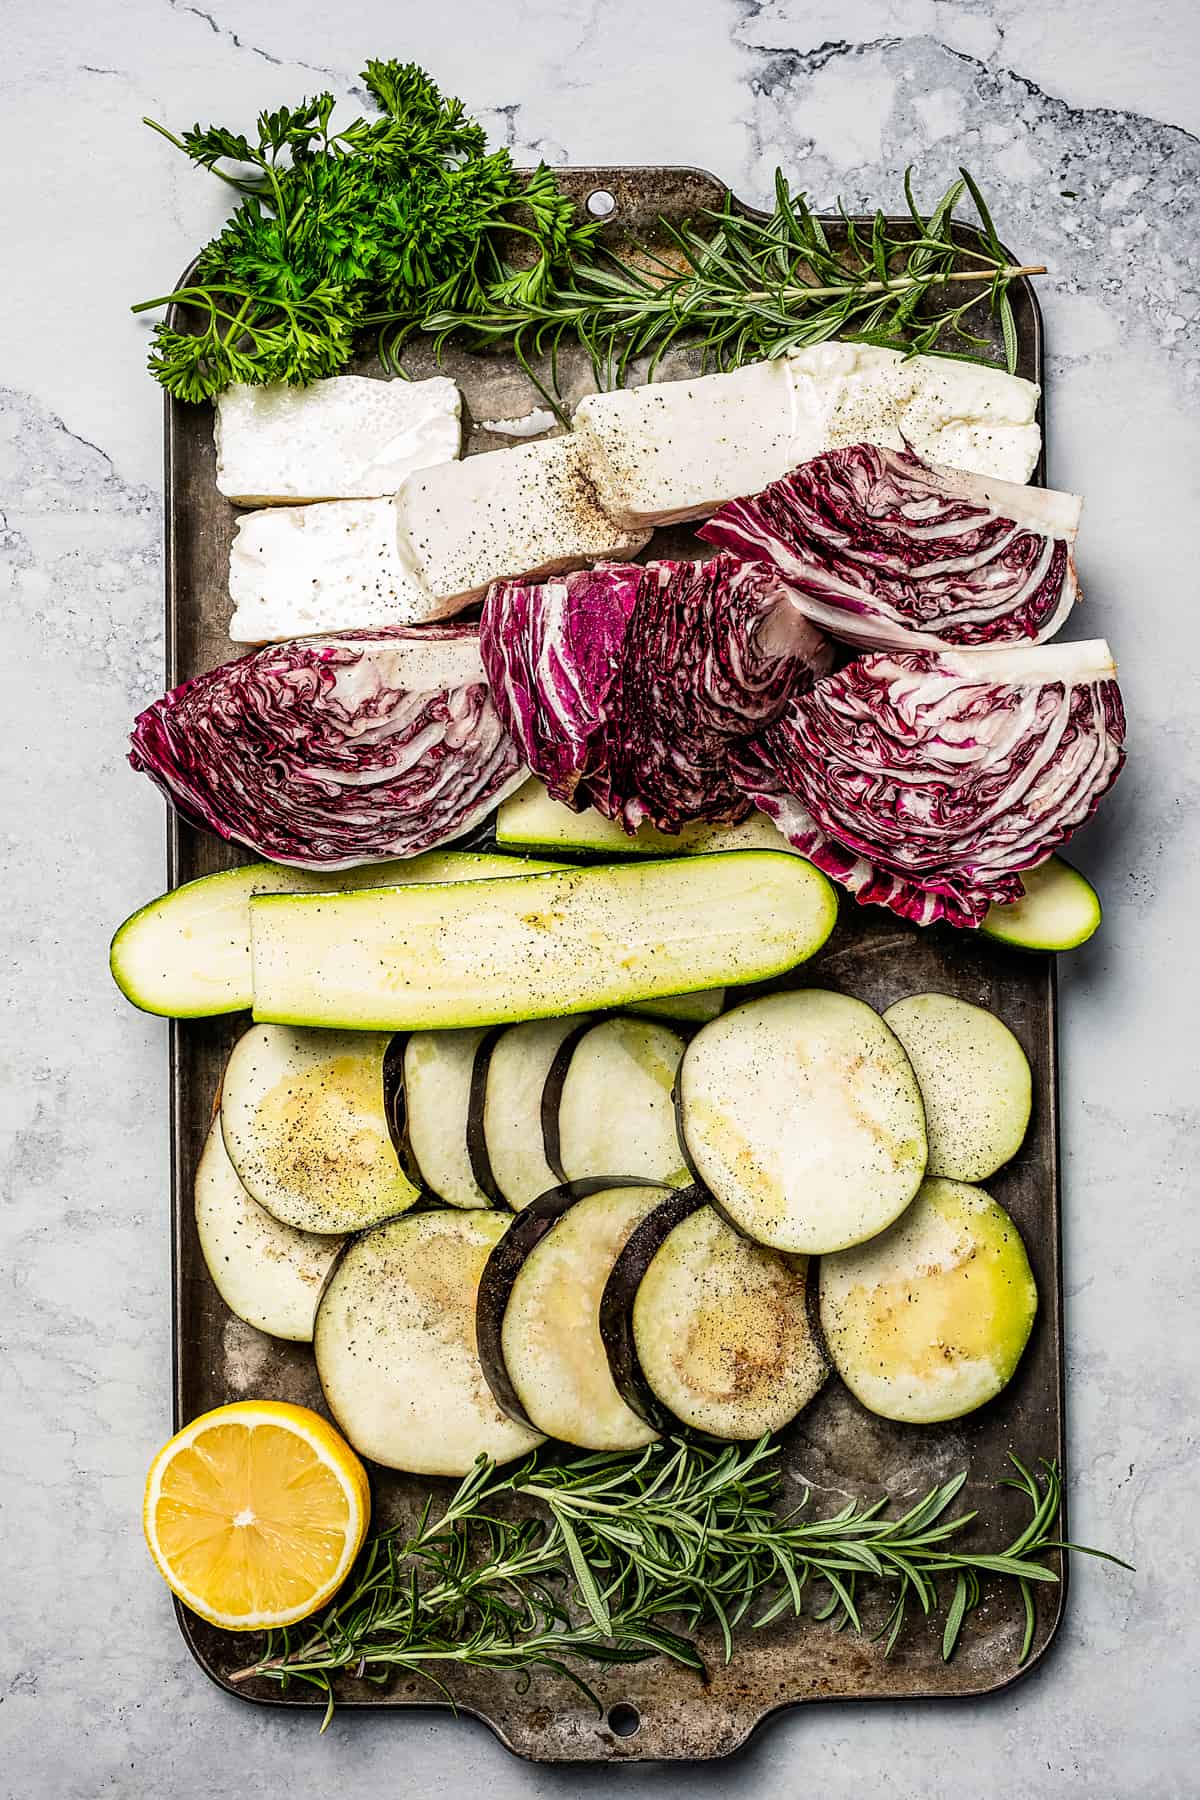 A sheet pan with layers of herbs, sliced cheese, vegetables, and a lemon slice.